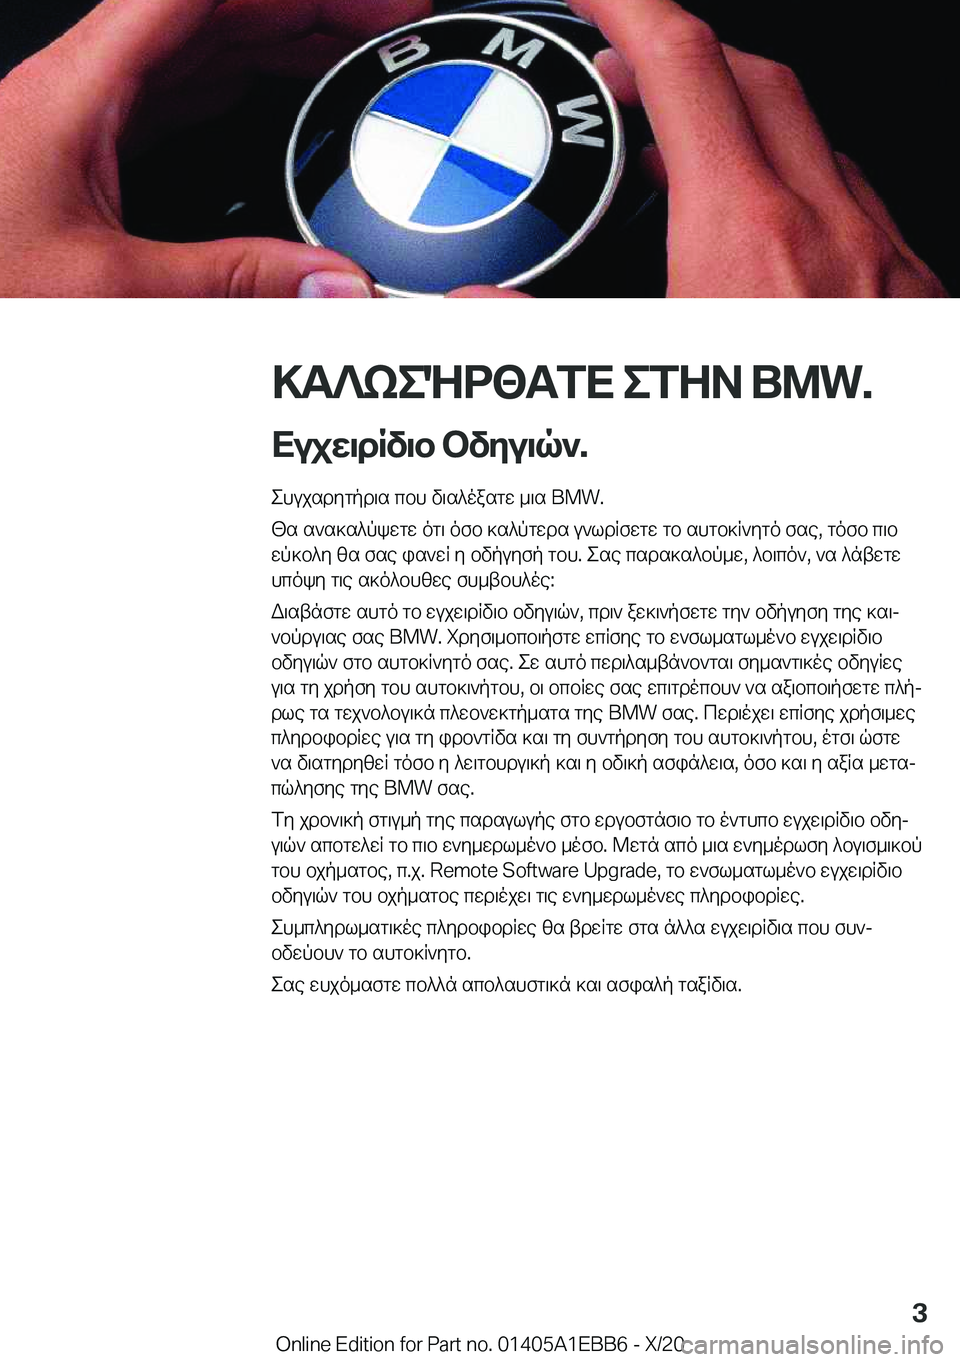 BMW 3 SERIES 2021  Notices Demploi (in French) >T?keNd<TfX�efZA��B�M�W�.
Xujw\dRv\b�bvyu\q`�. ehujsdygpd\s�cbh�v\s^oasgw�_\s��B�M�W�.
[s�s`s]s^pkwgw�og\�ofb�